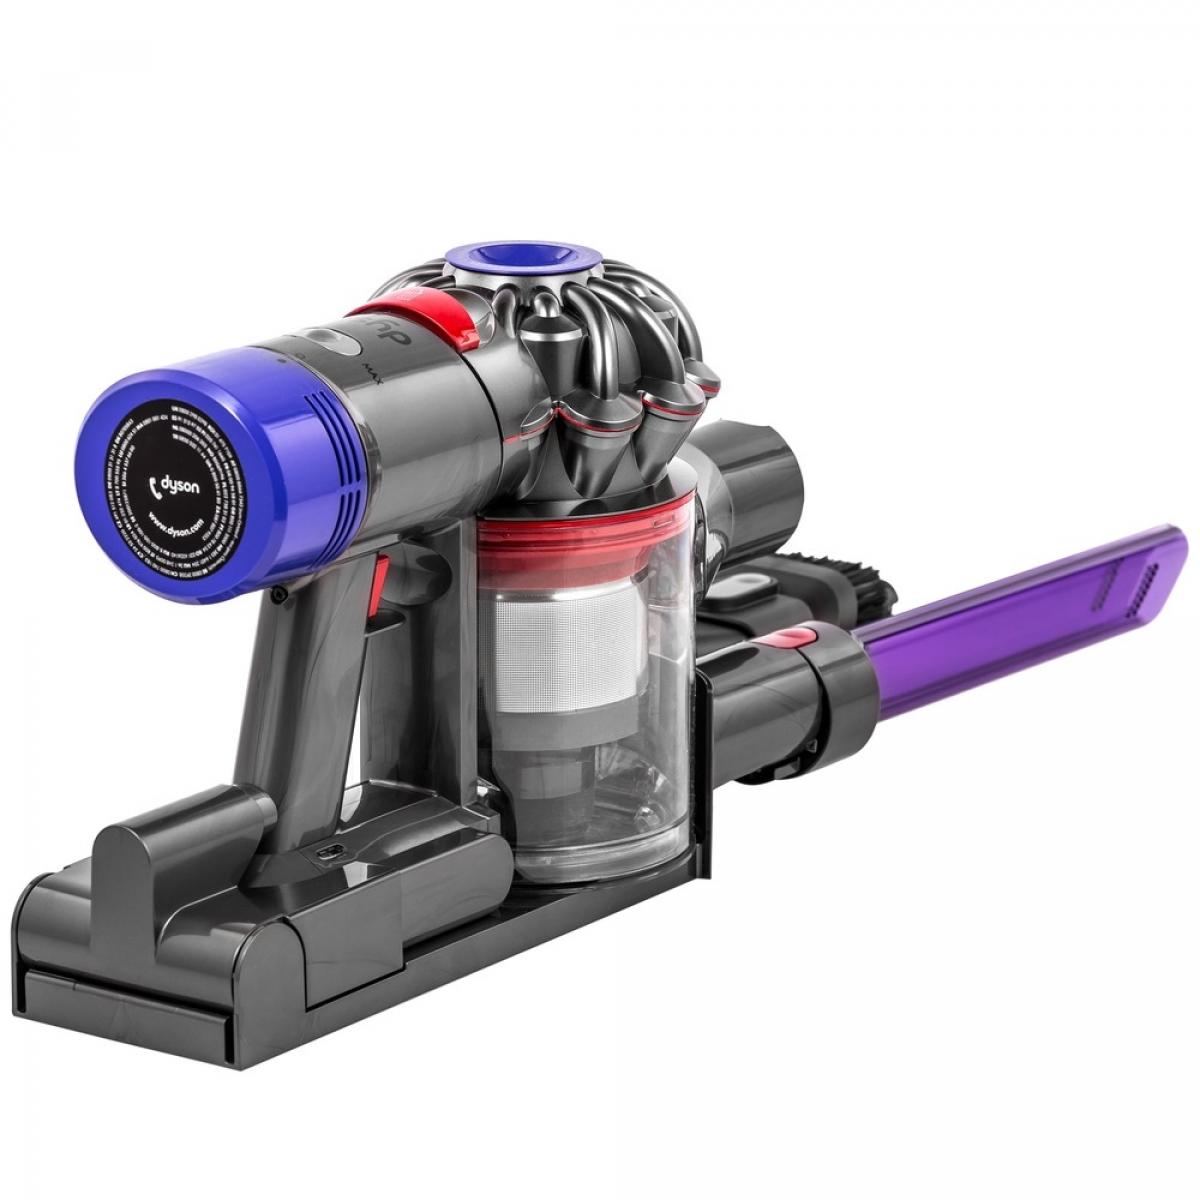 Dyson sv25 v8 absolute. Дайсон v8 absolute. Пылесос Дайсон v8 absolute. Пылесос Dyson v8 absolute+. Пылесос Dyson v8 absolute Plus.